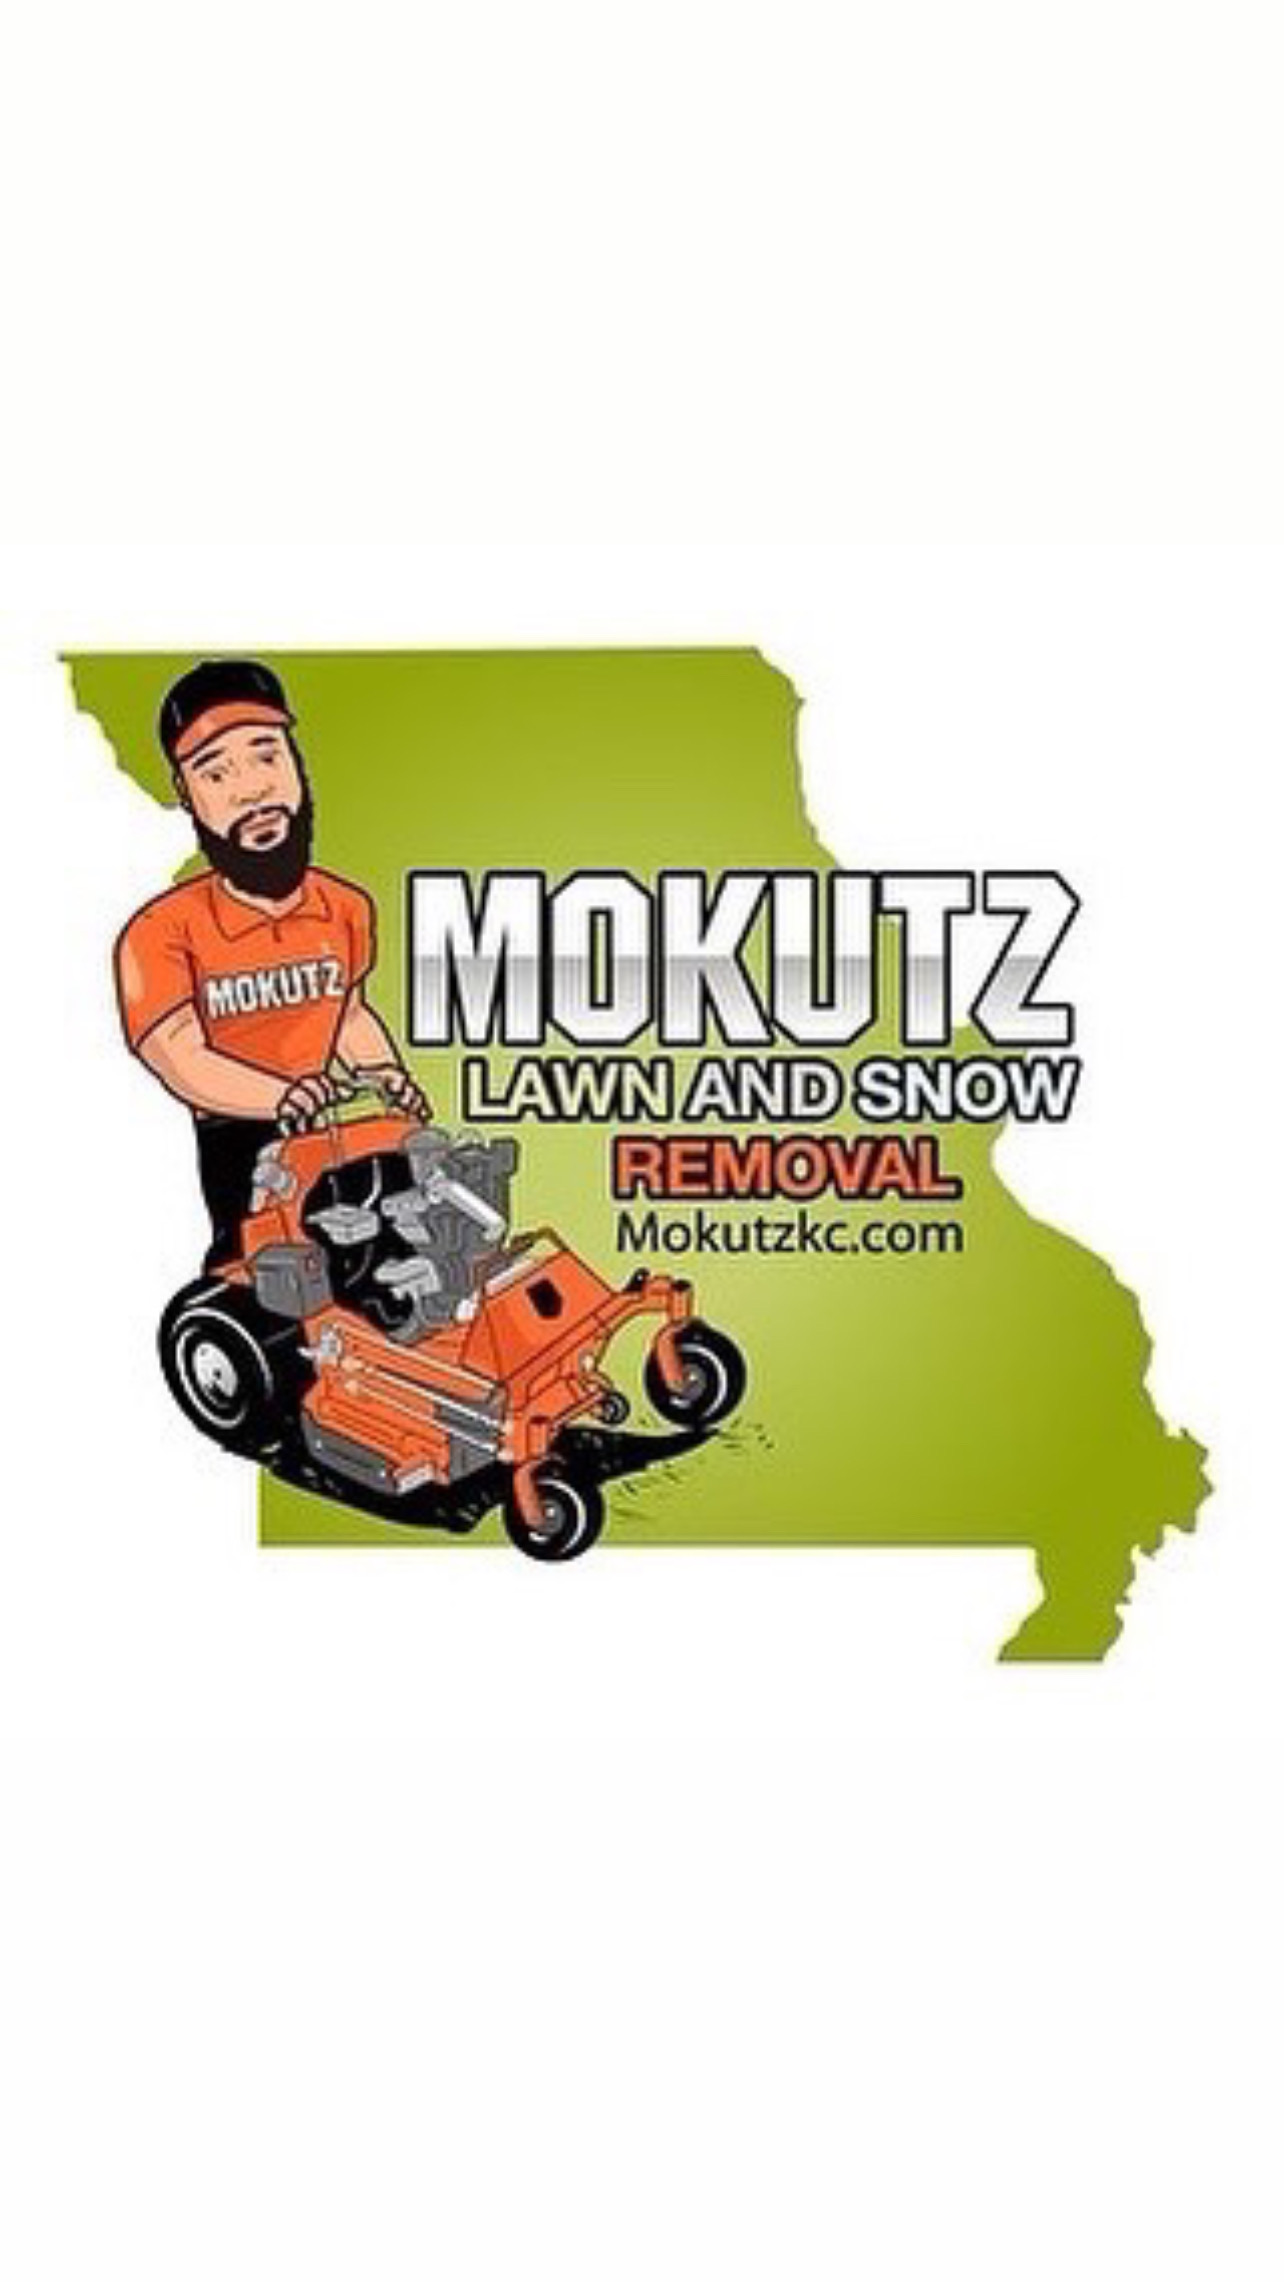 MoKutz Lawn and Snow Removal Logo